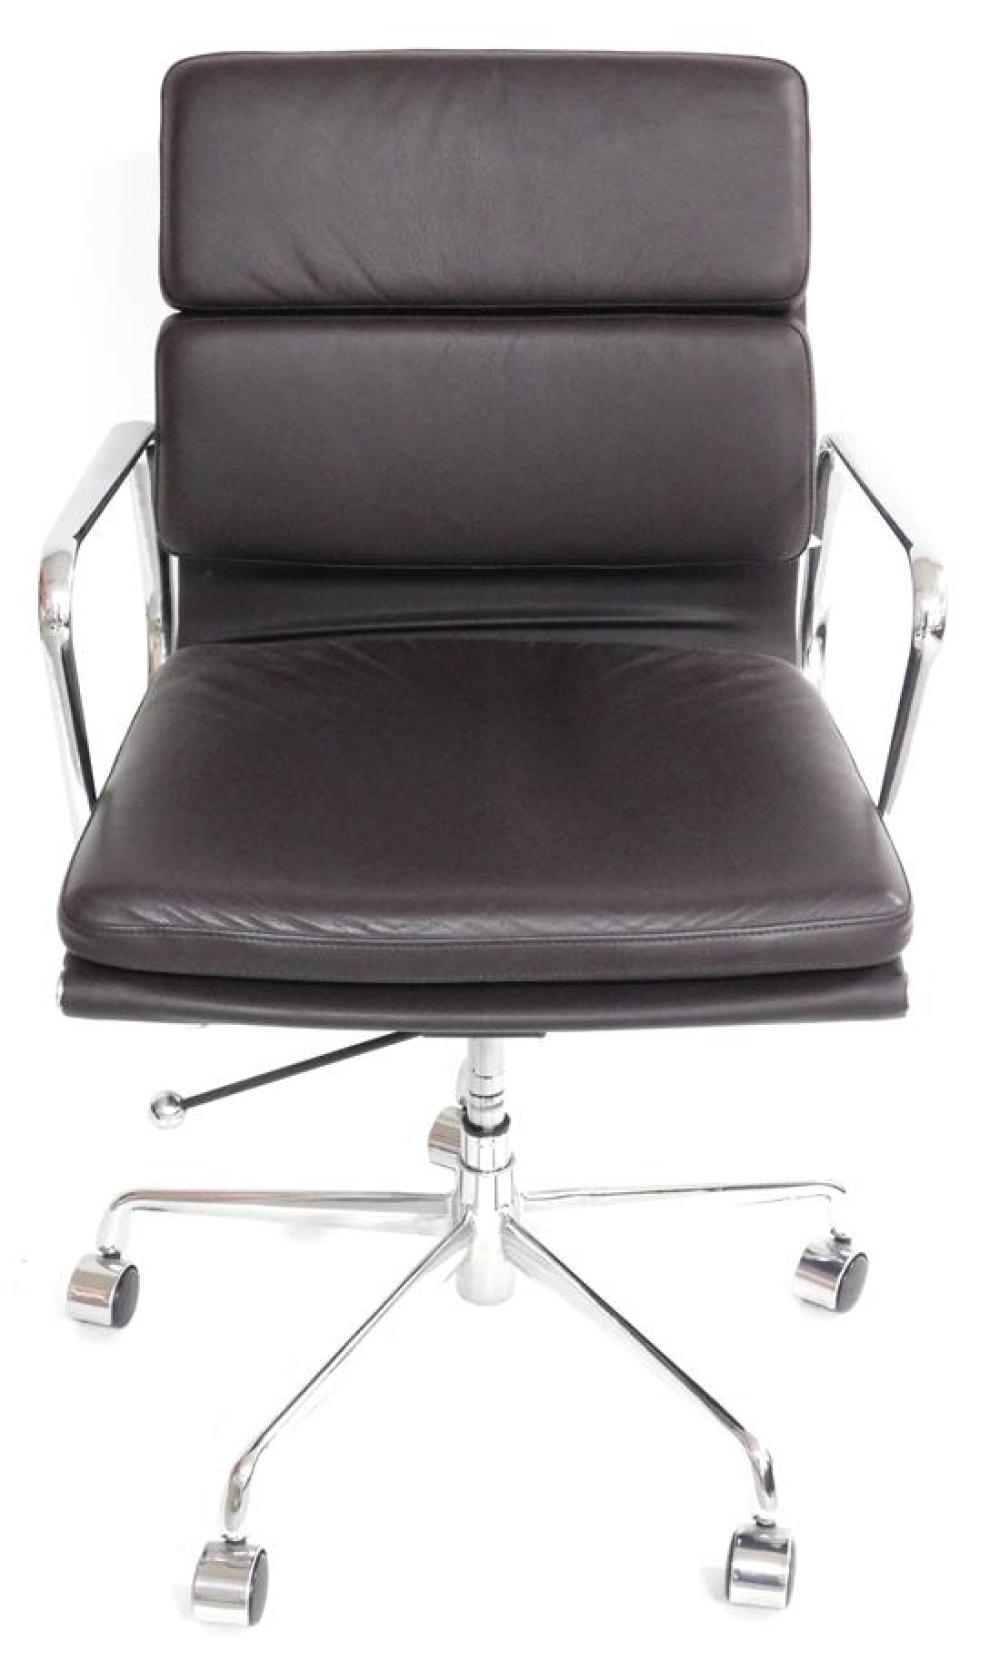 OFFICE CHAIR EAMES STYLE DESIGN 31d827